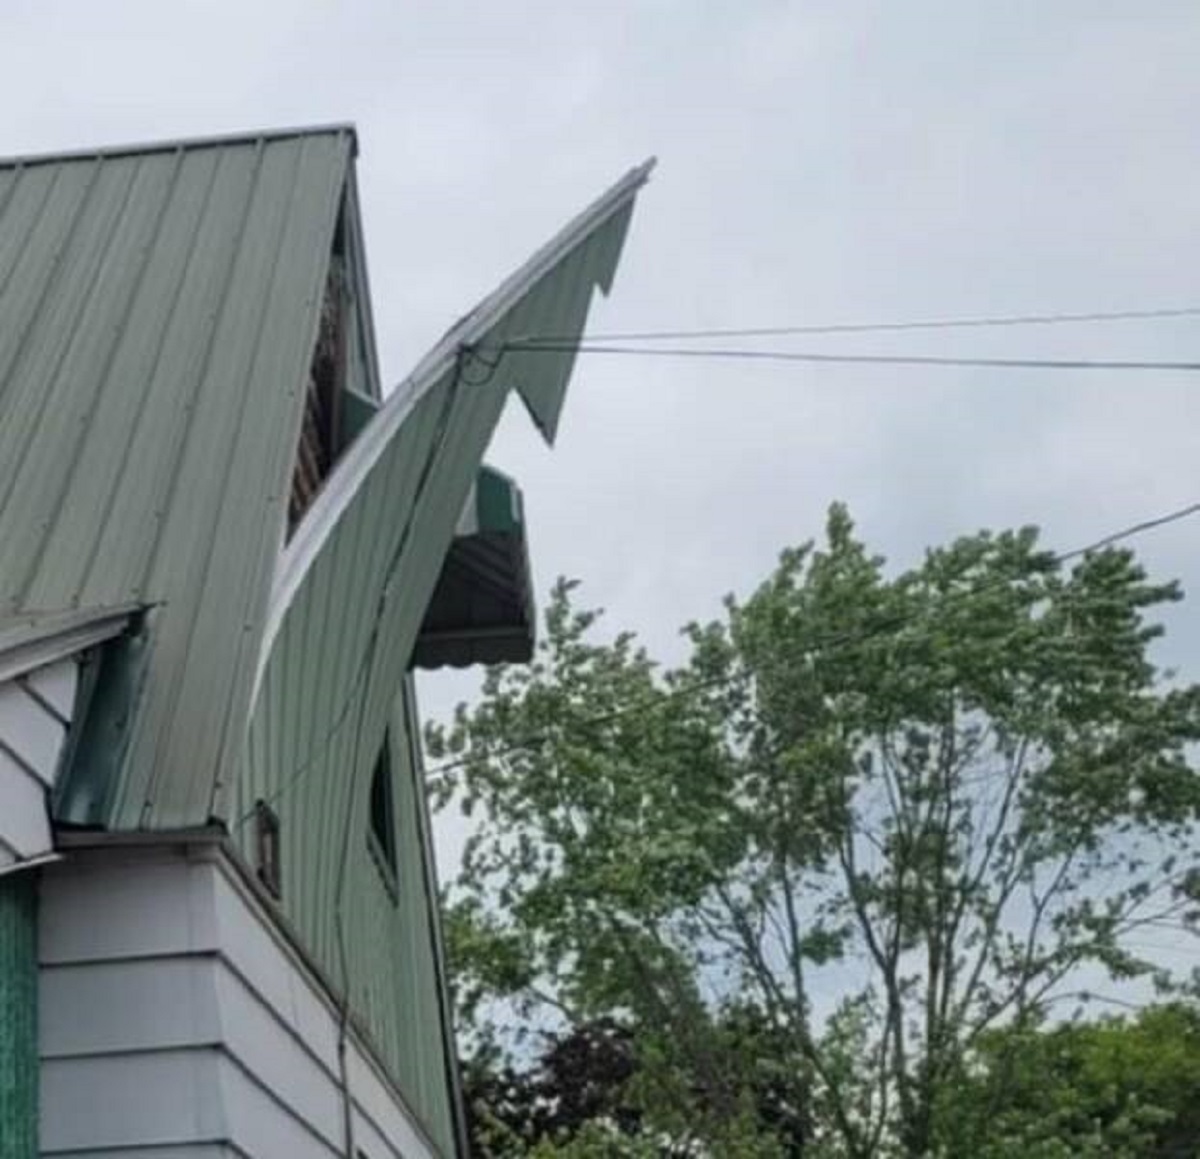 "Siding being peeled off my house"